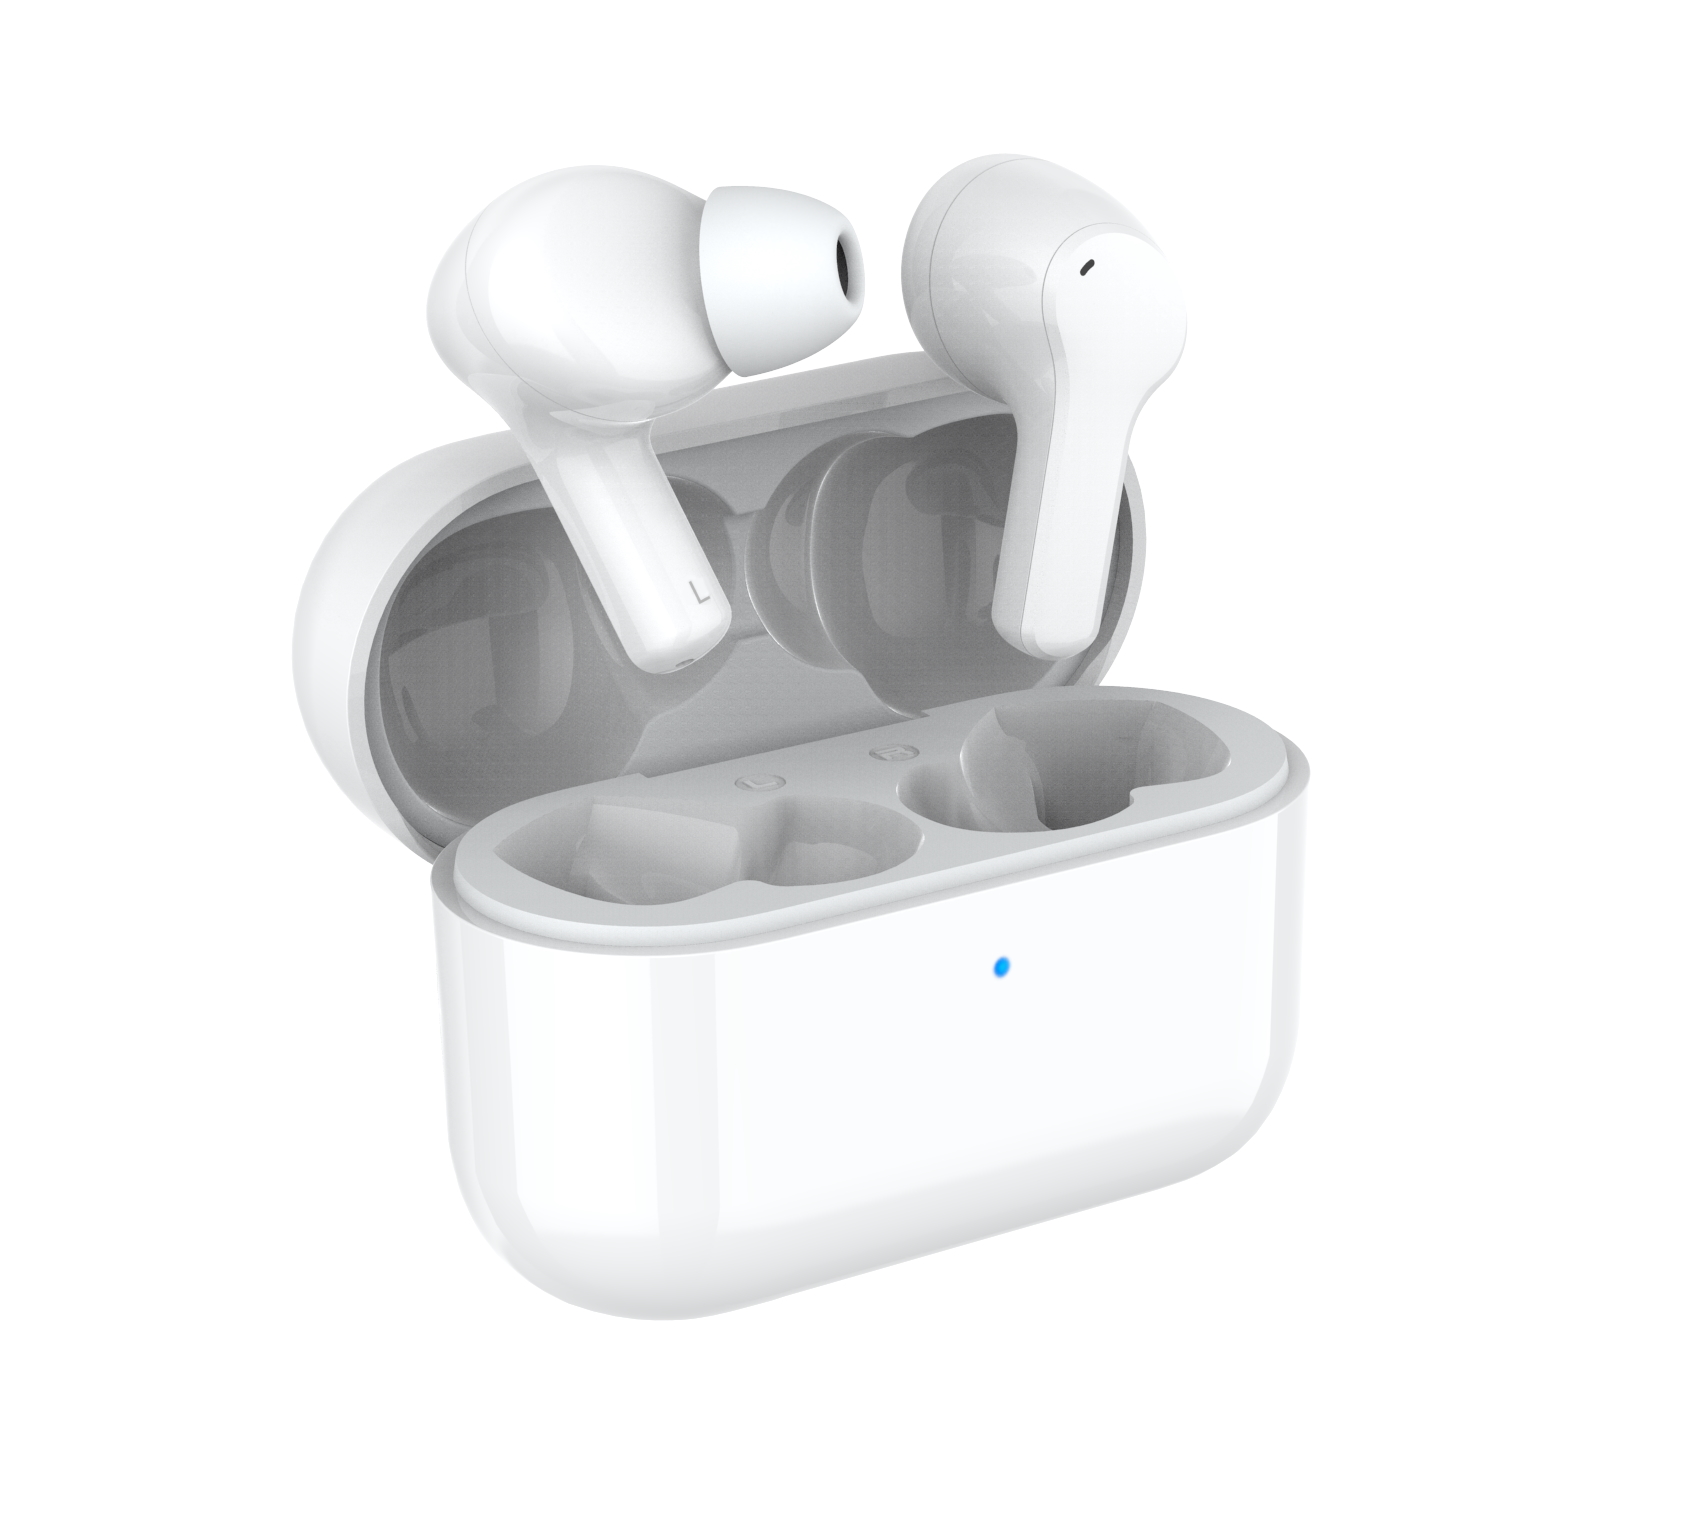 Honor Choice TWS earbuds launch for US$34.99 with touch controls